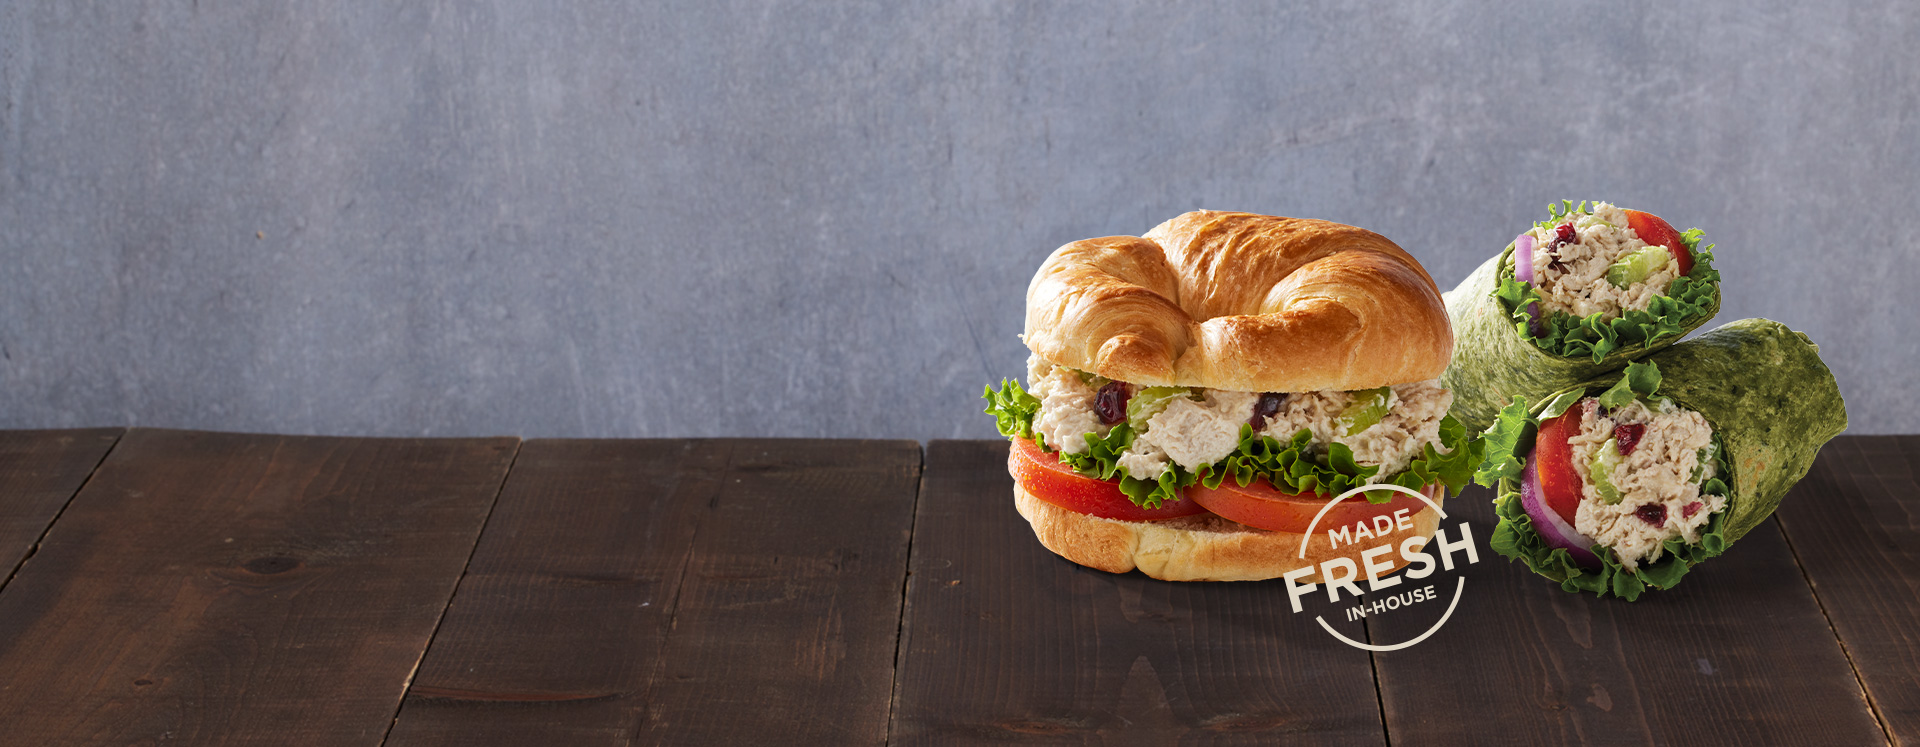 made-to-order chicken salad as a sandwich or wrap